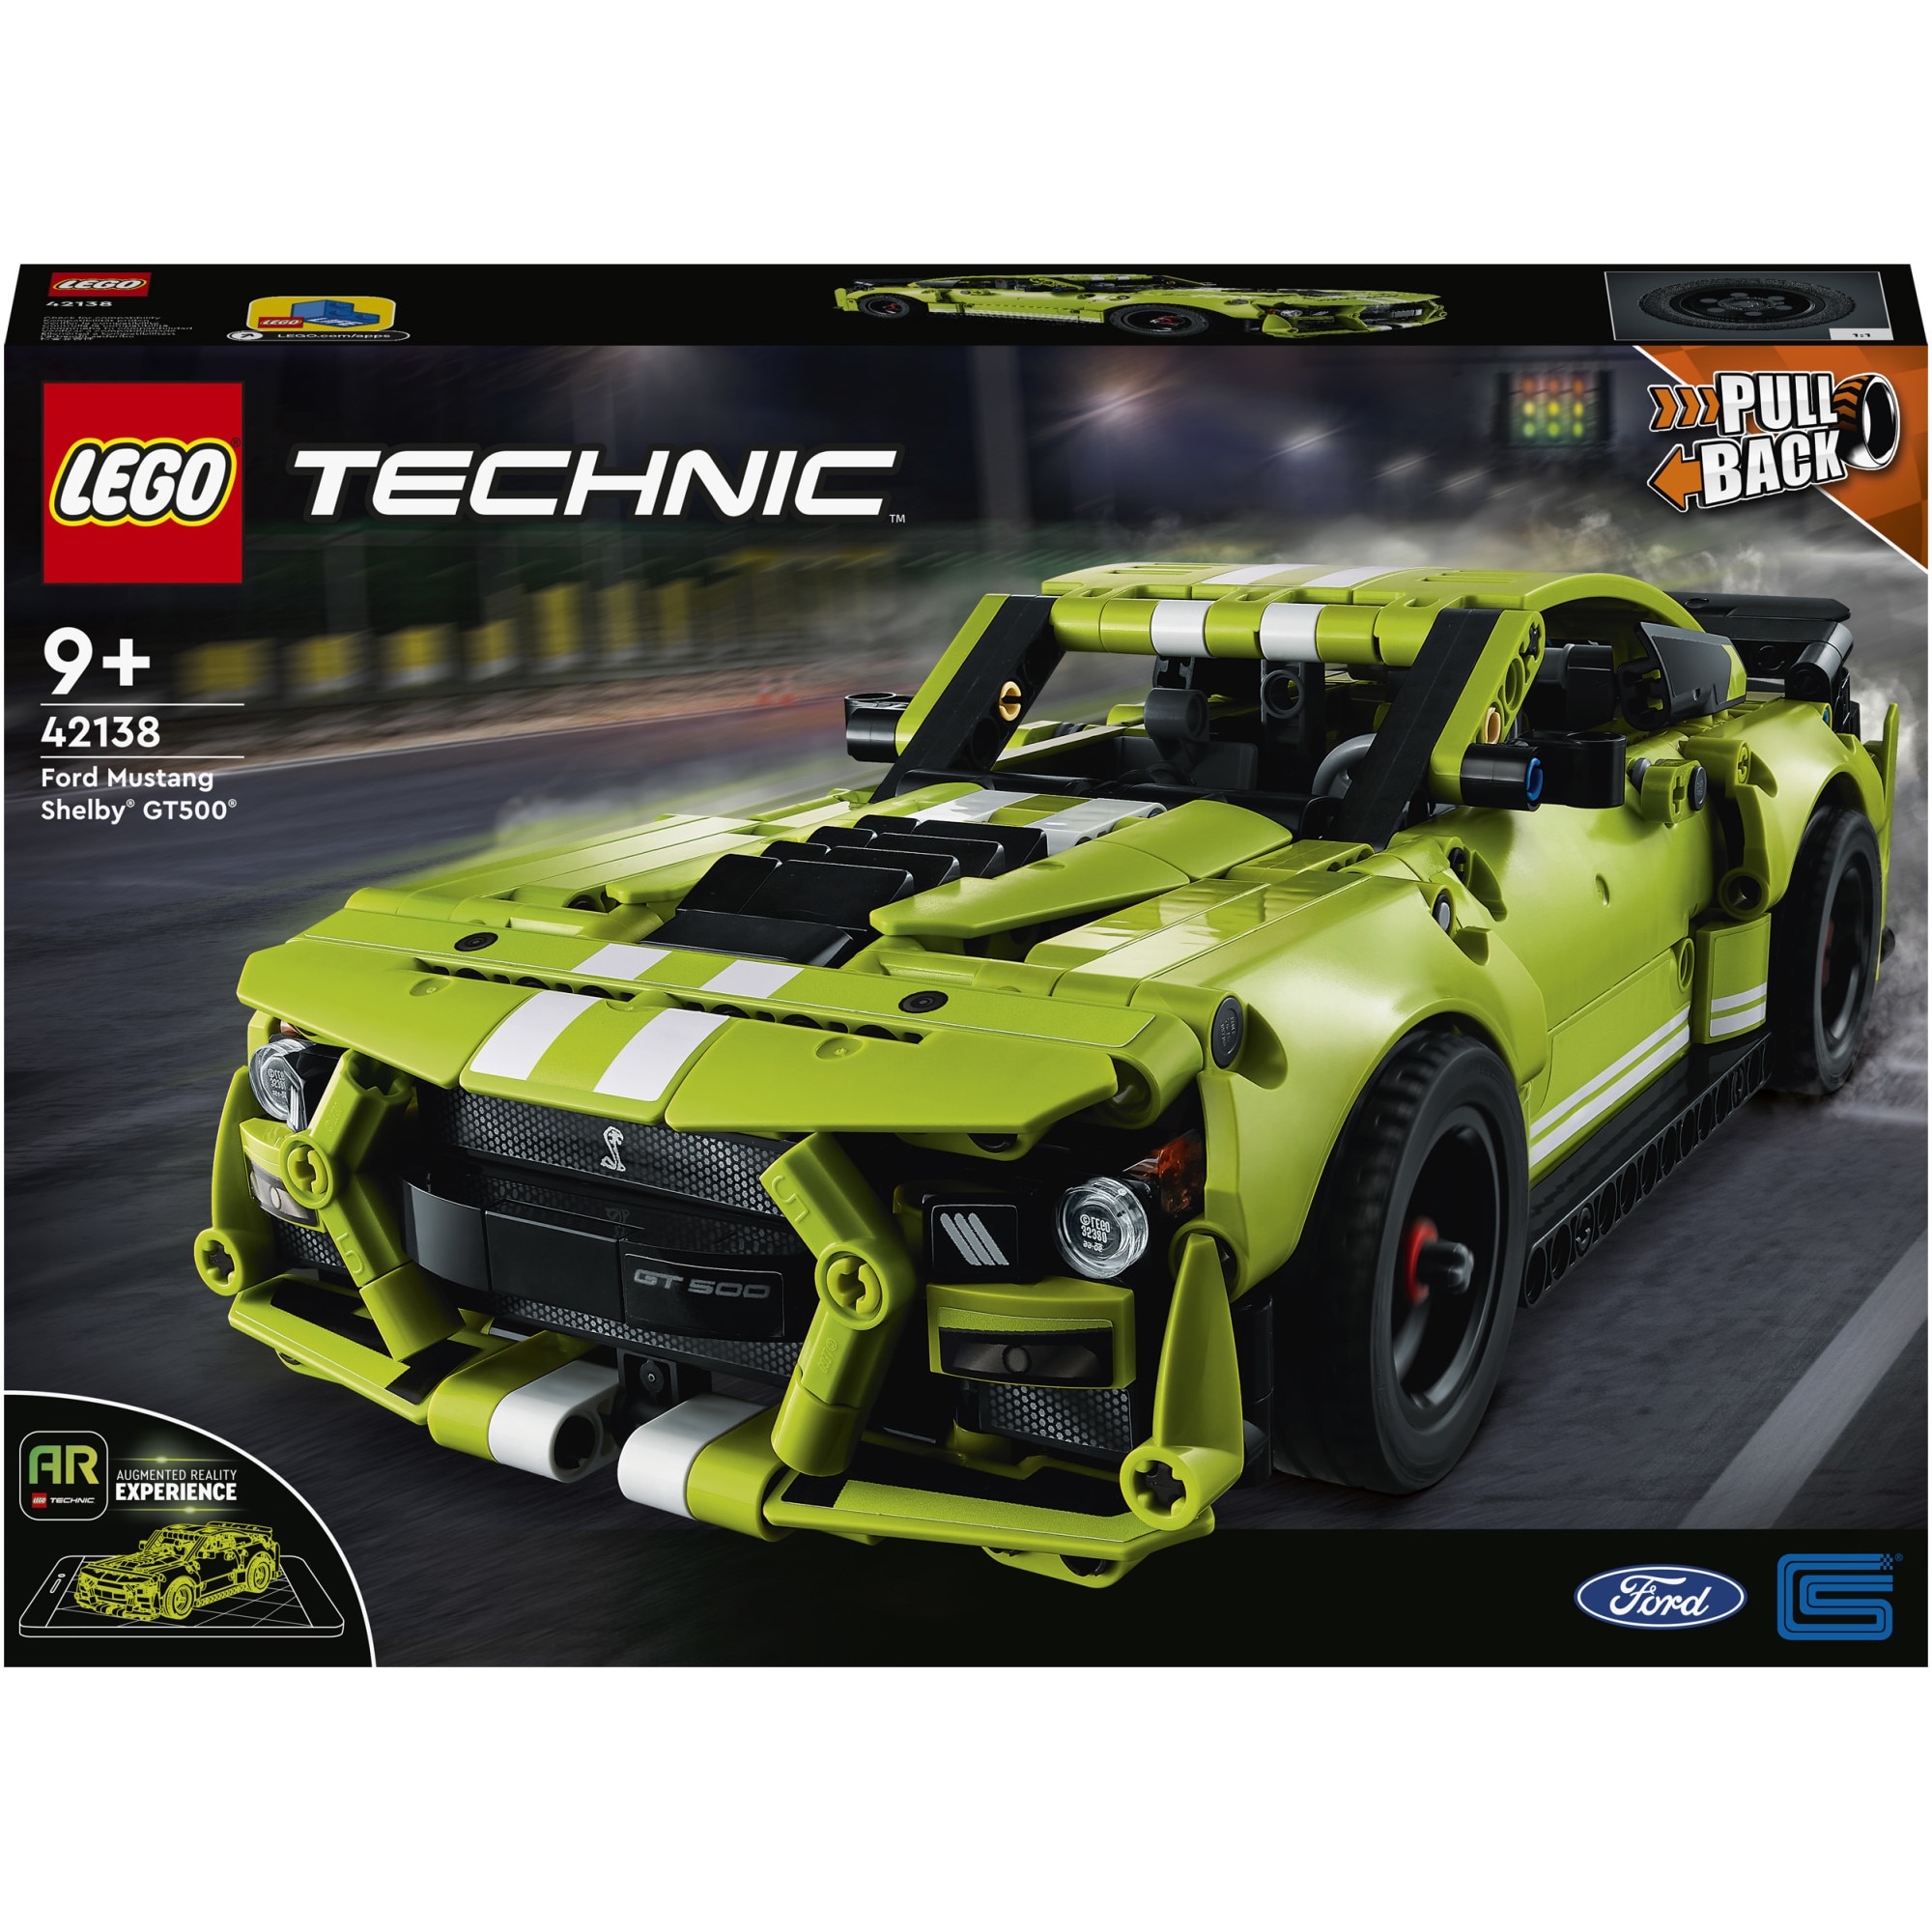 Fotografie LEGO® Technic - Ford Mustang Shelby® GT500® 42138, 544 piese